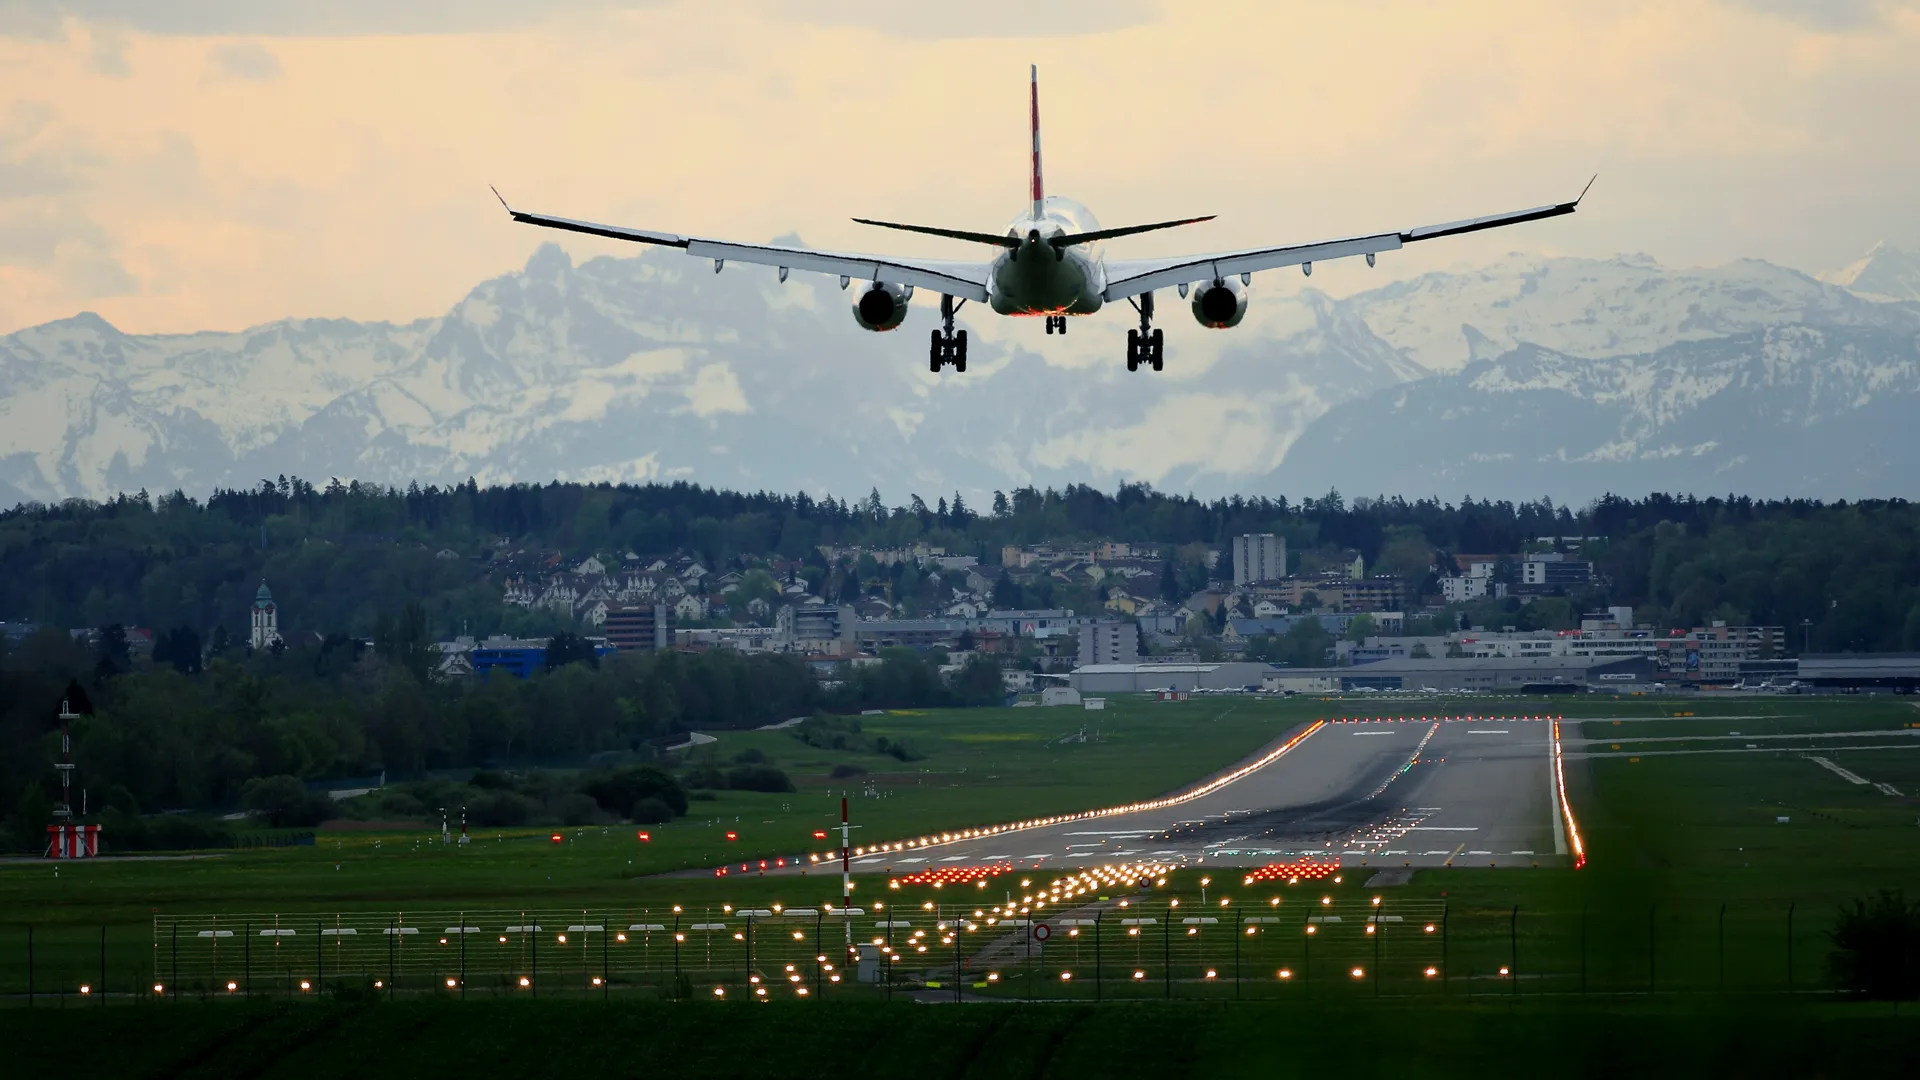 An airplane taking off from the airport.